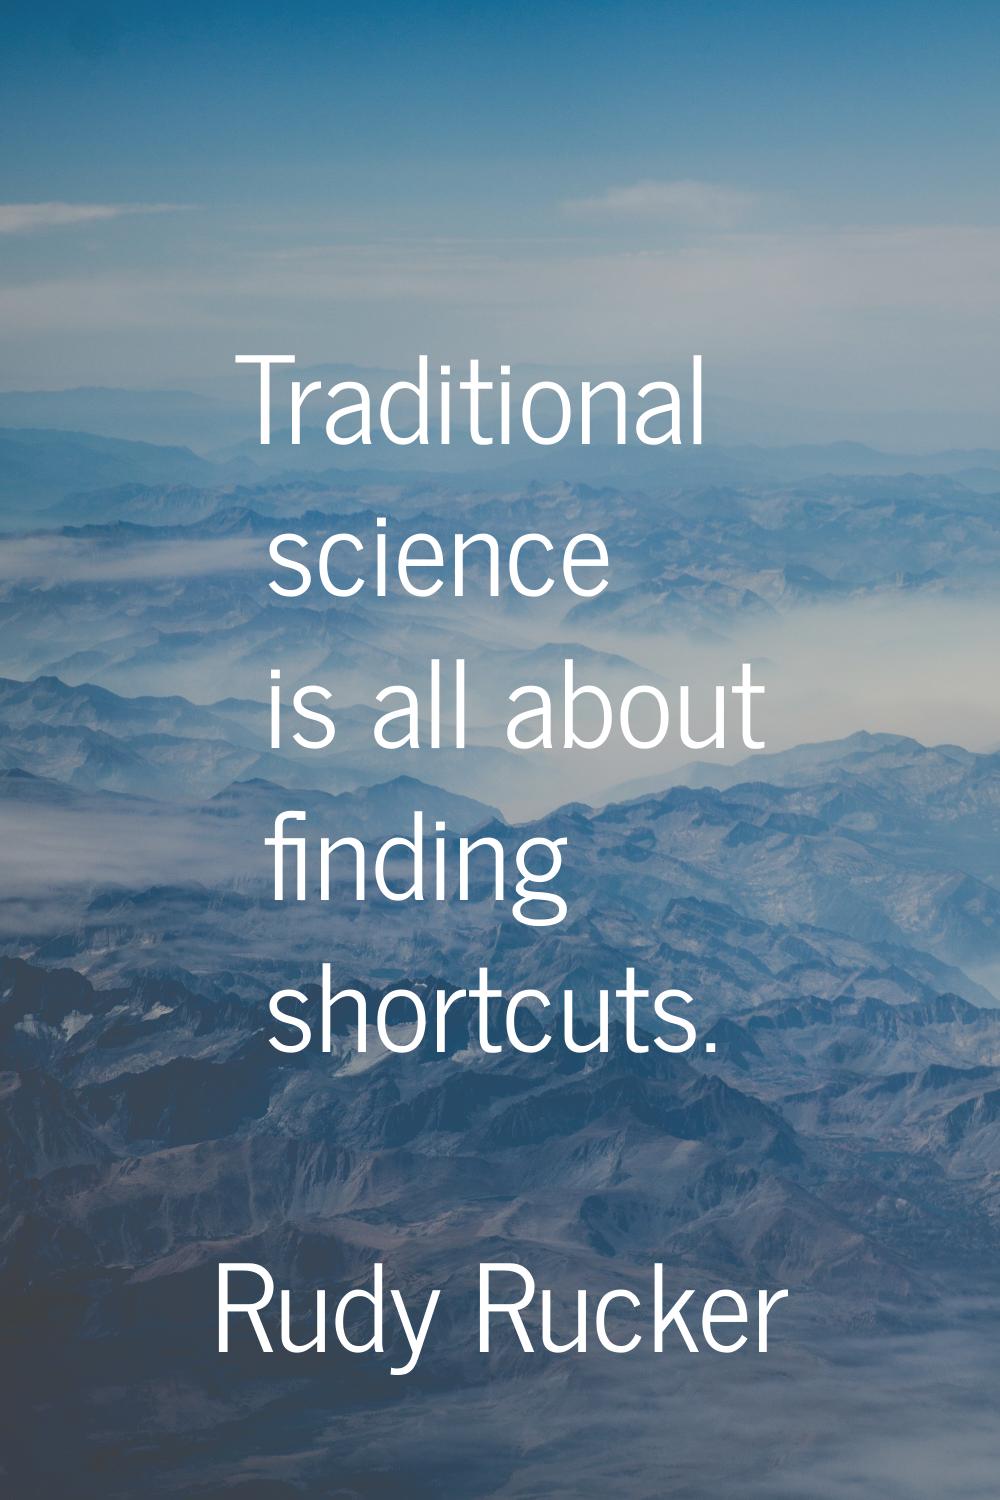 Traditional science is all about finding shortcuts.